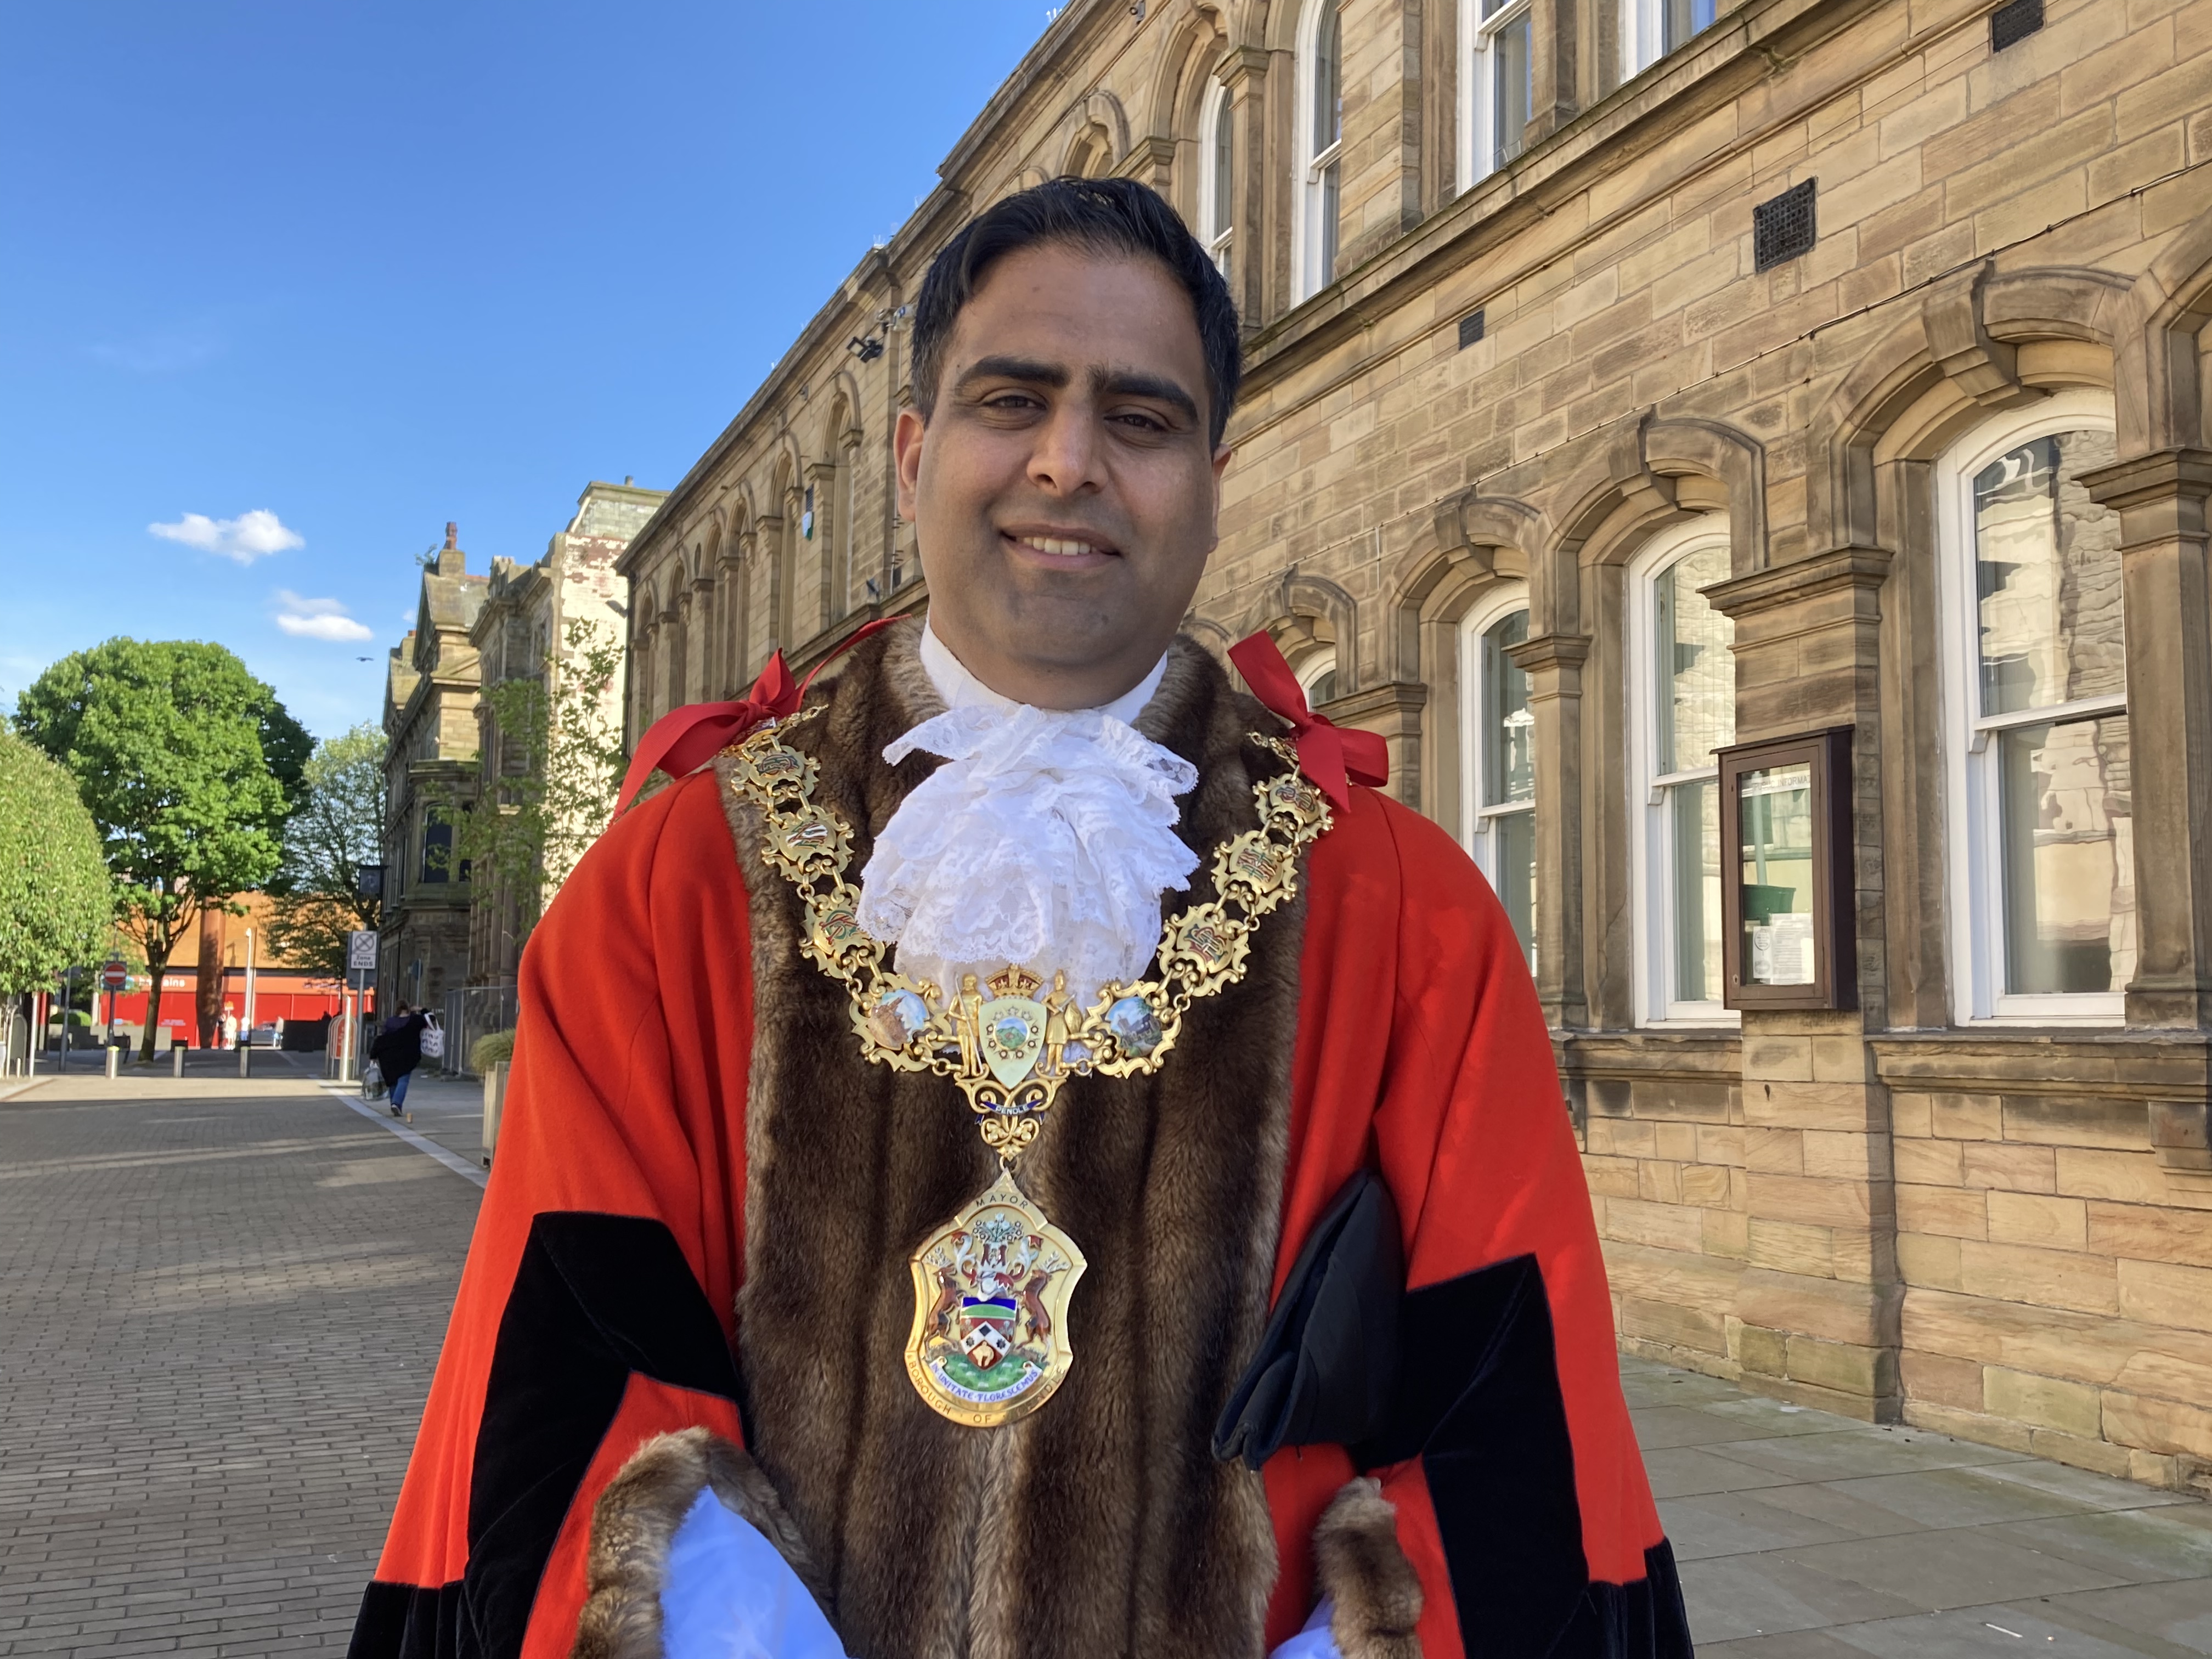 Mayor of Pendle has been busy in the local community